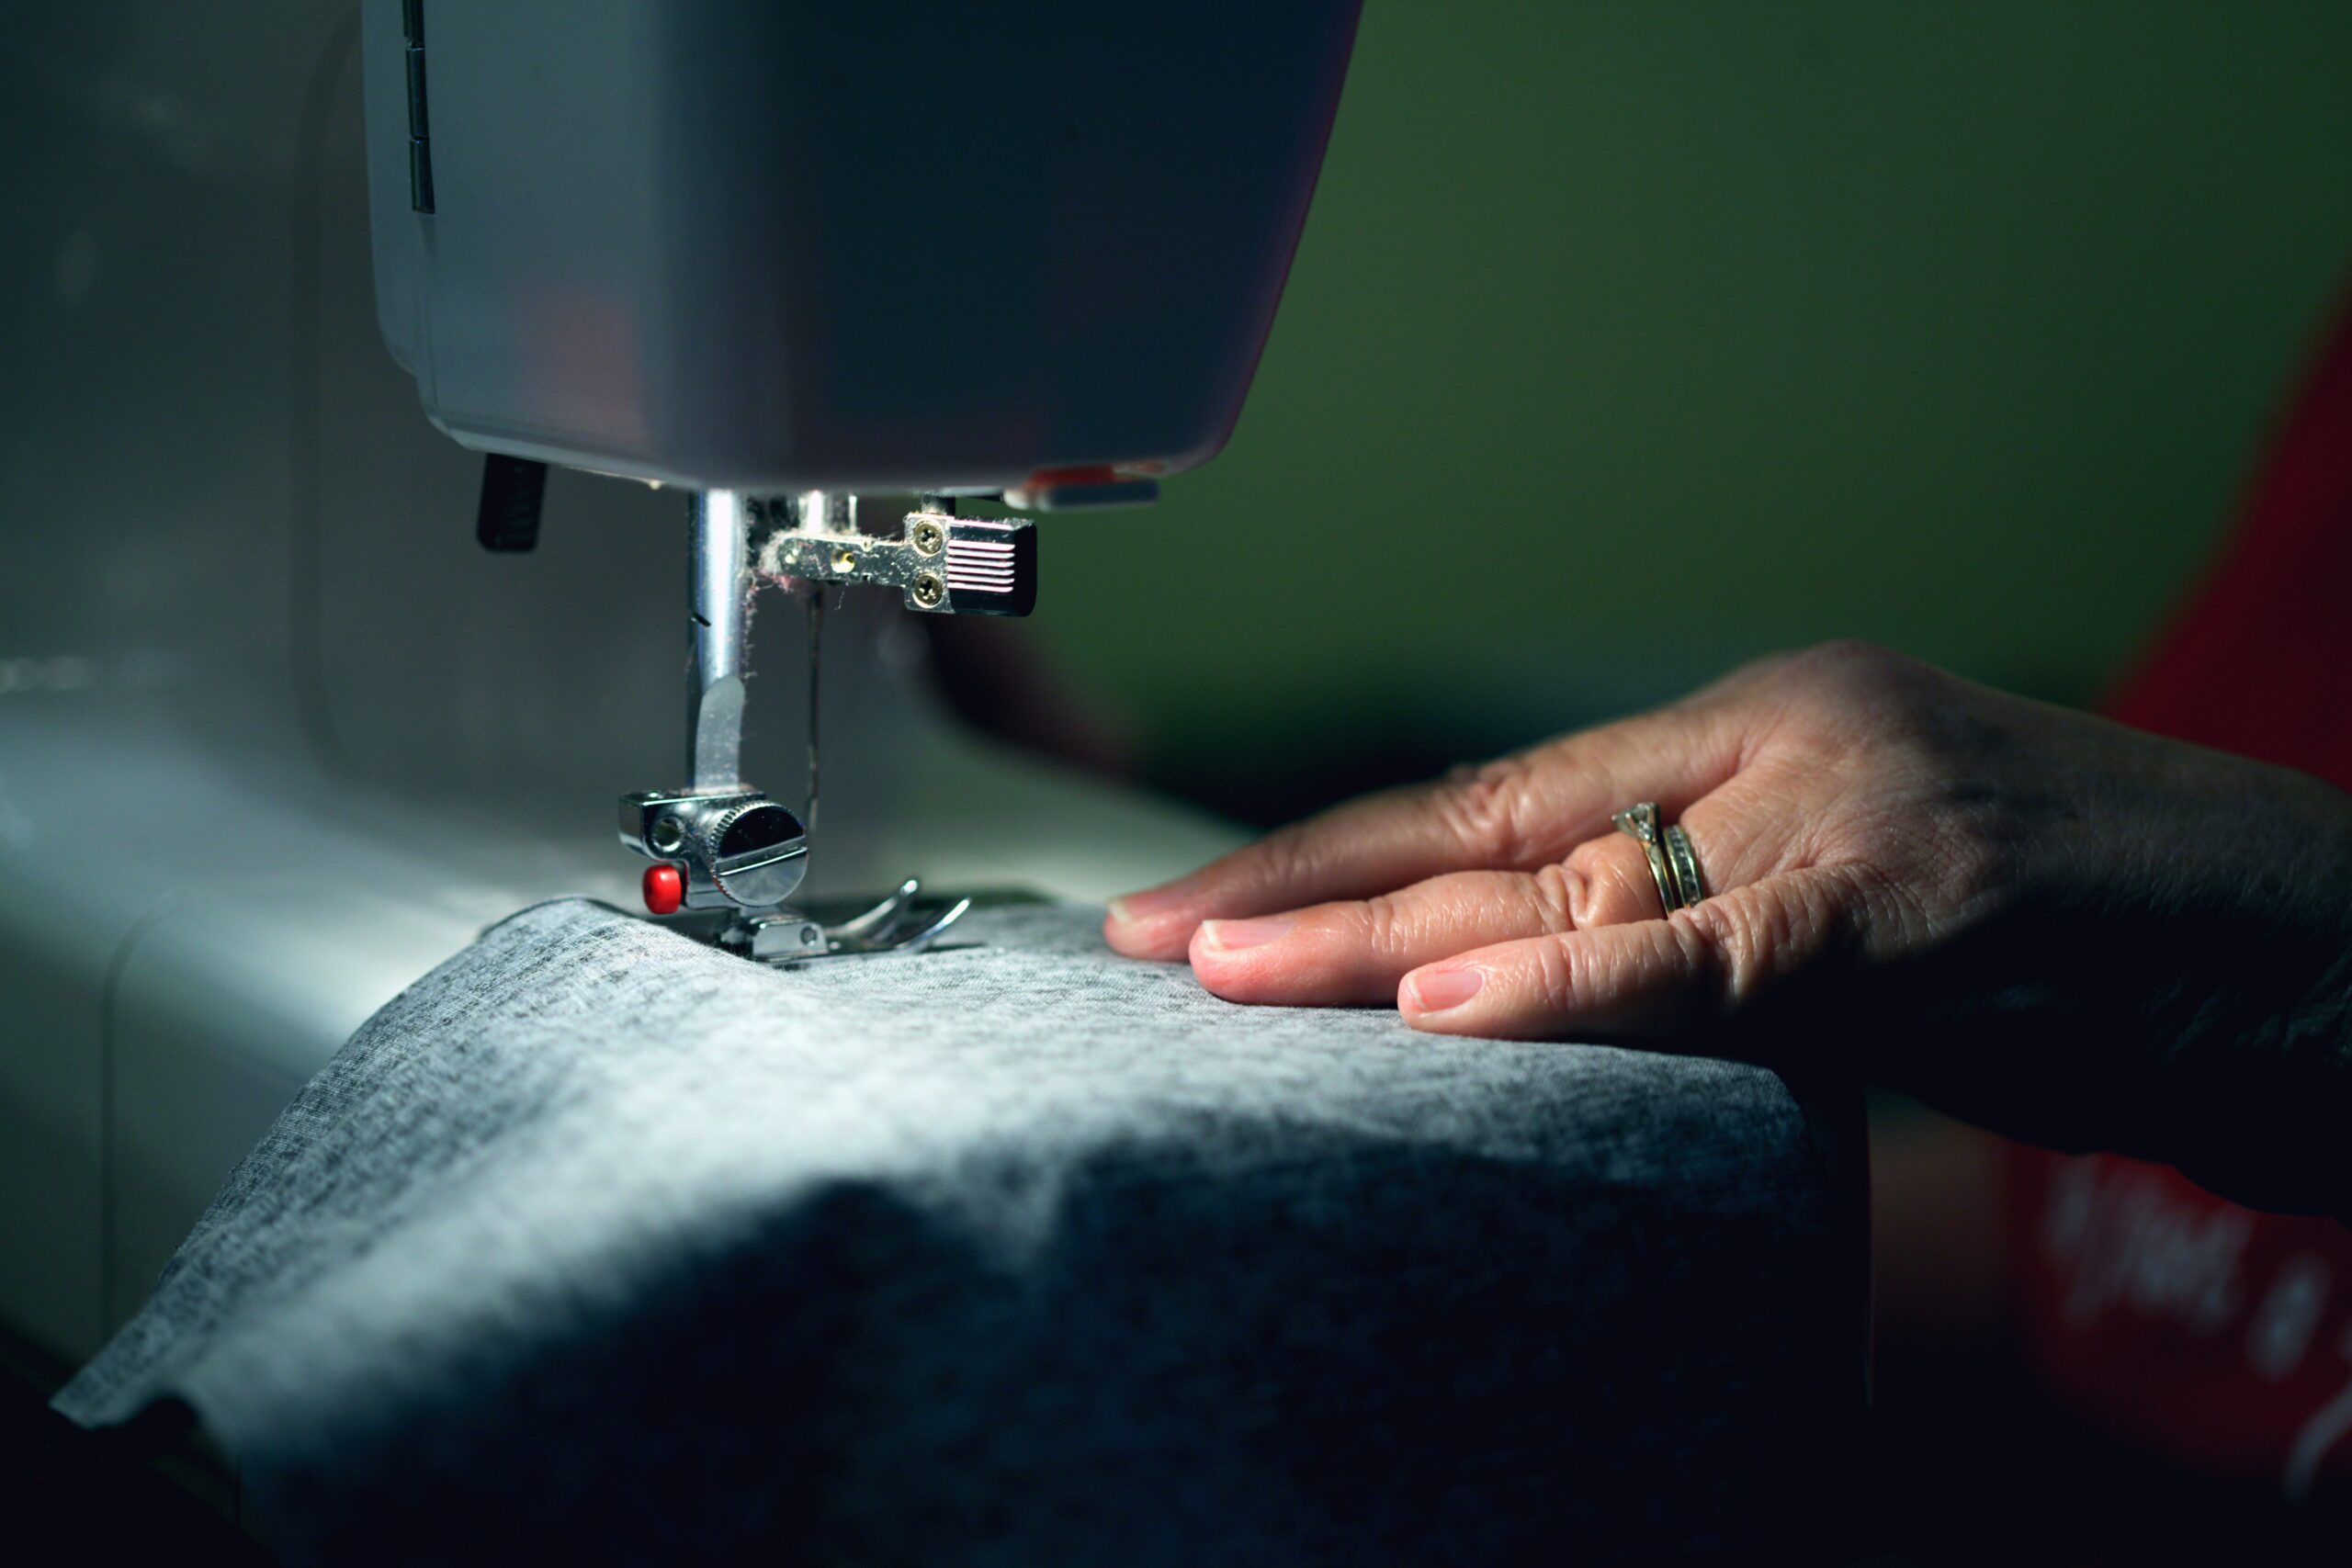 An individual sewing viscose fabric on a sewing machine.